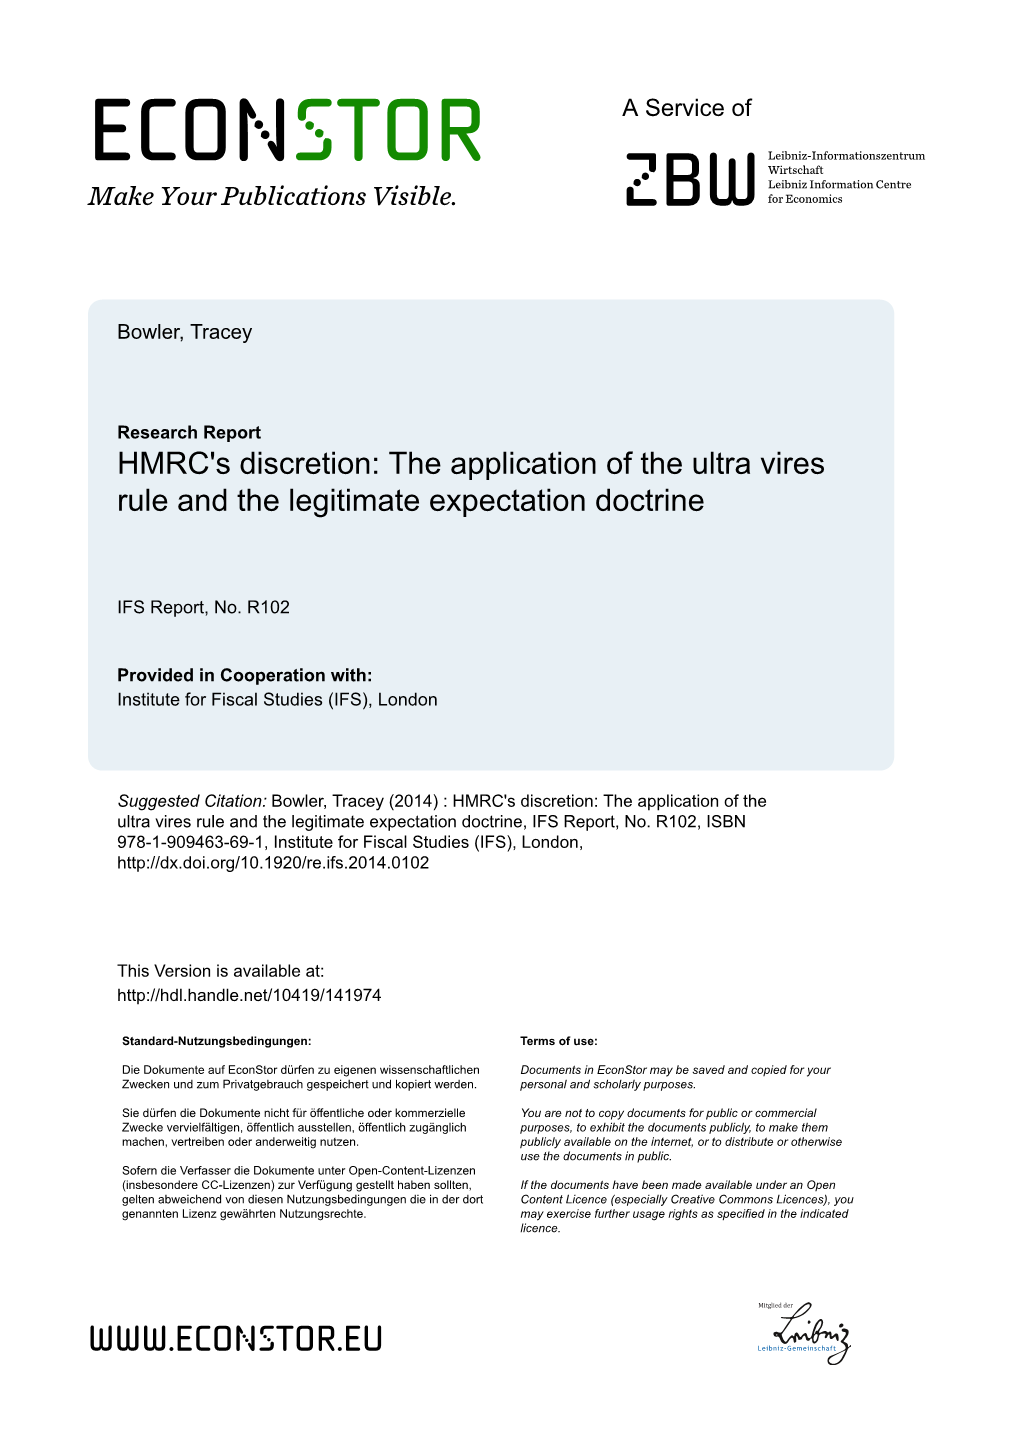 HMRC's Discretion: the Application of the Ultra Vires Rule and the Legitimate Expectation Doctrine